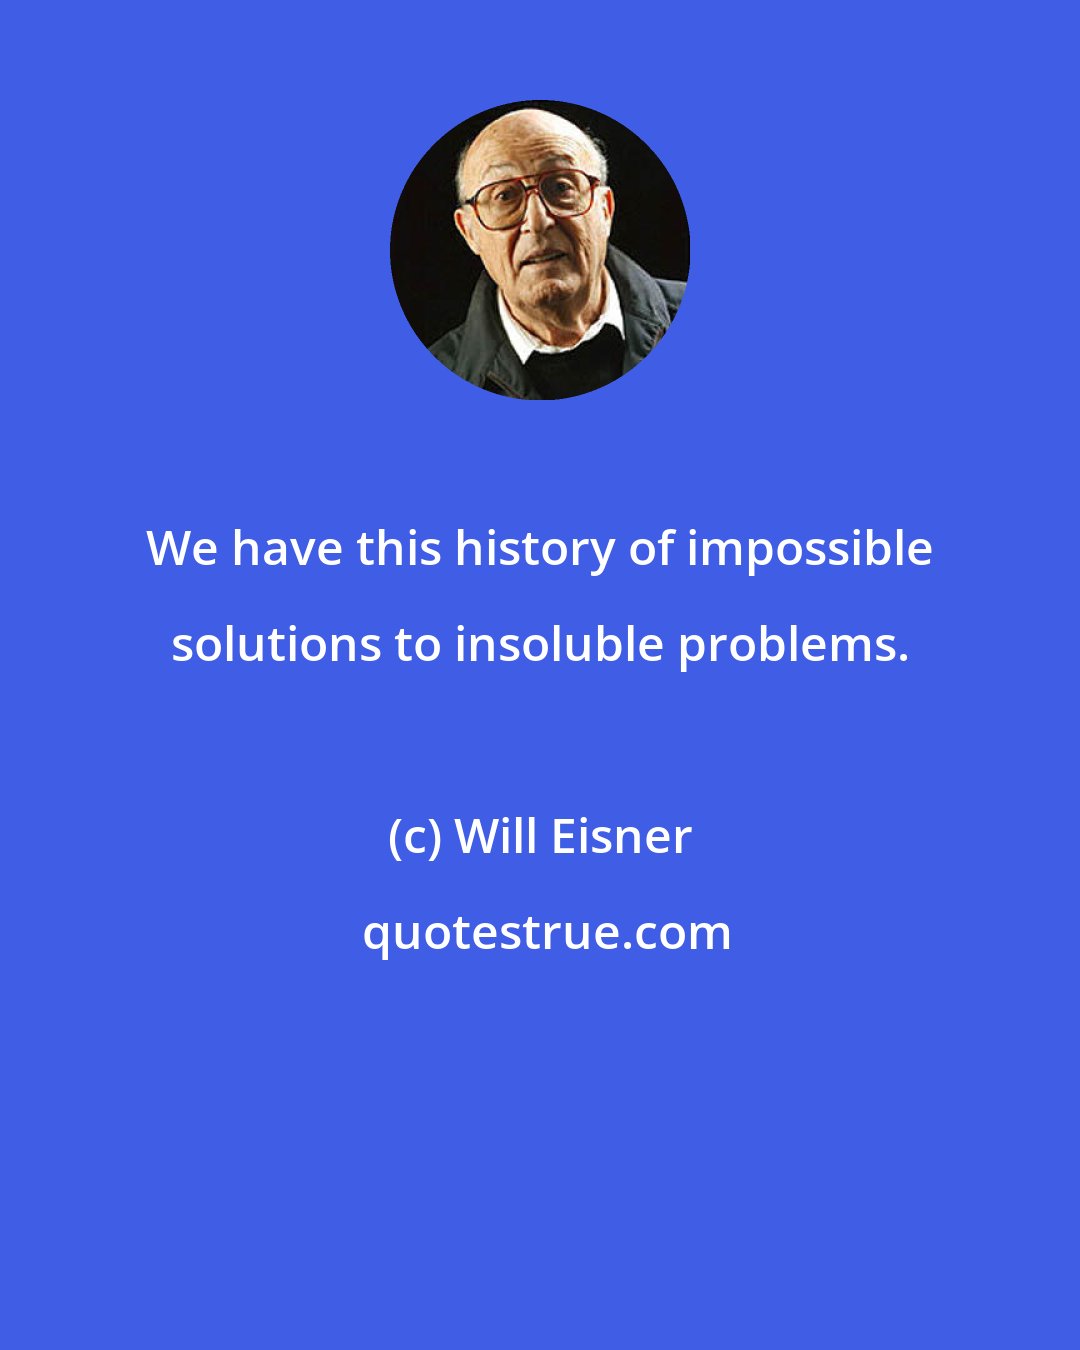 Will Eisner: We have this history of impossible solutions to insoluble problems.